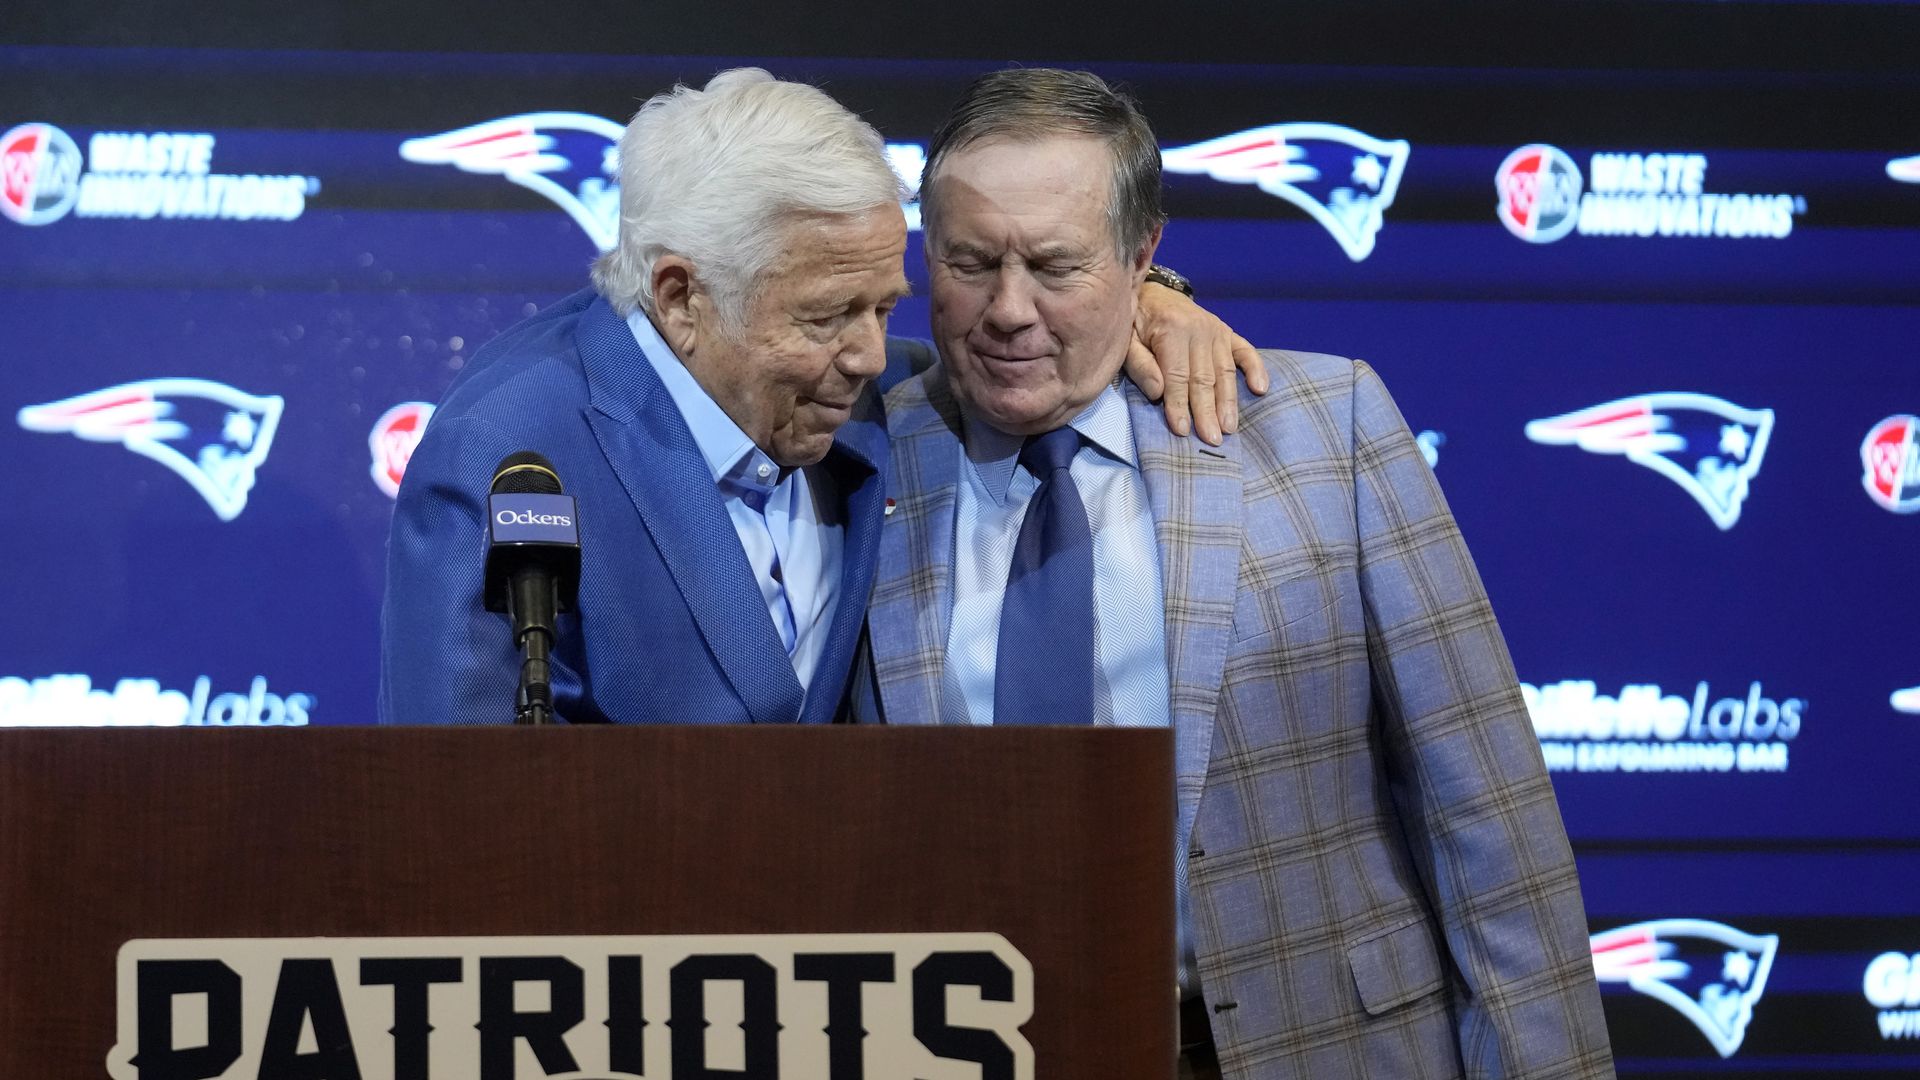 New England Patriots team owner Robert Kraft and now-former head coach Bill Belichick embrace during a press conference on Thursday.